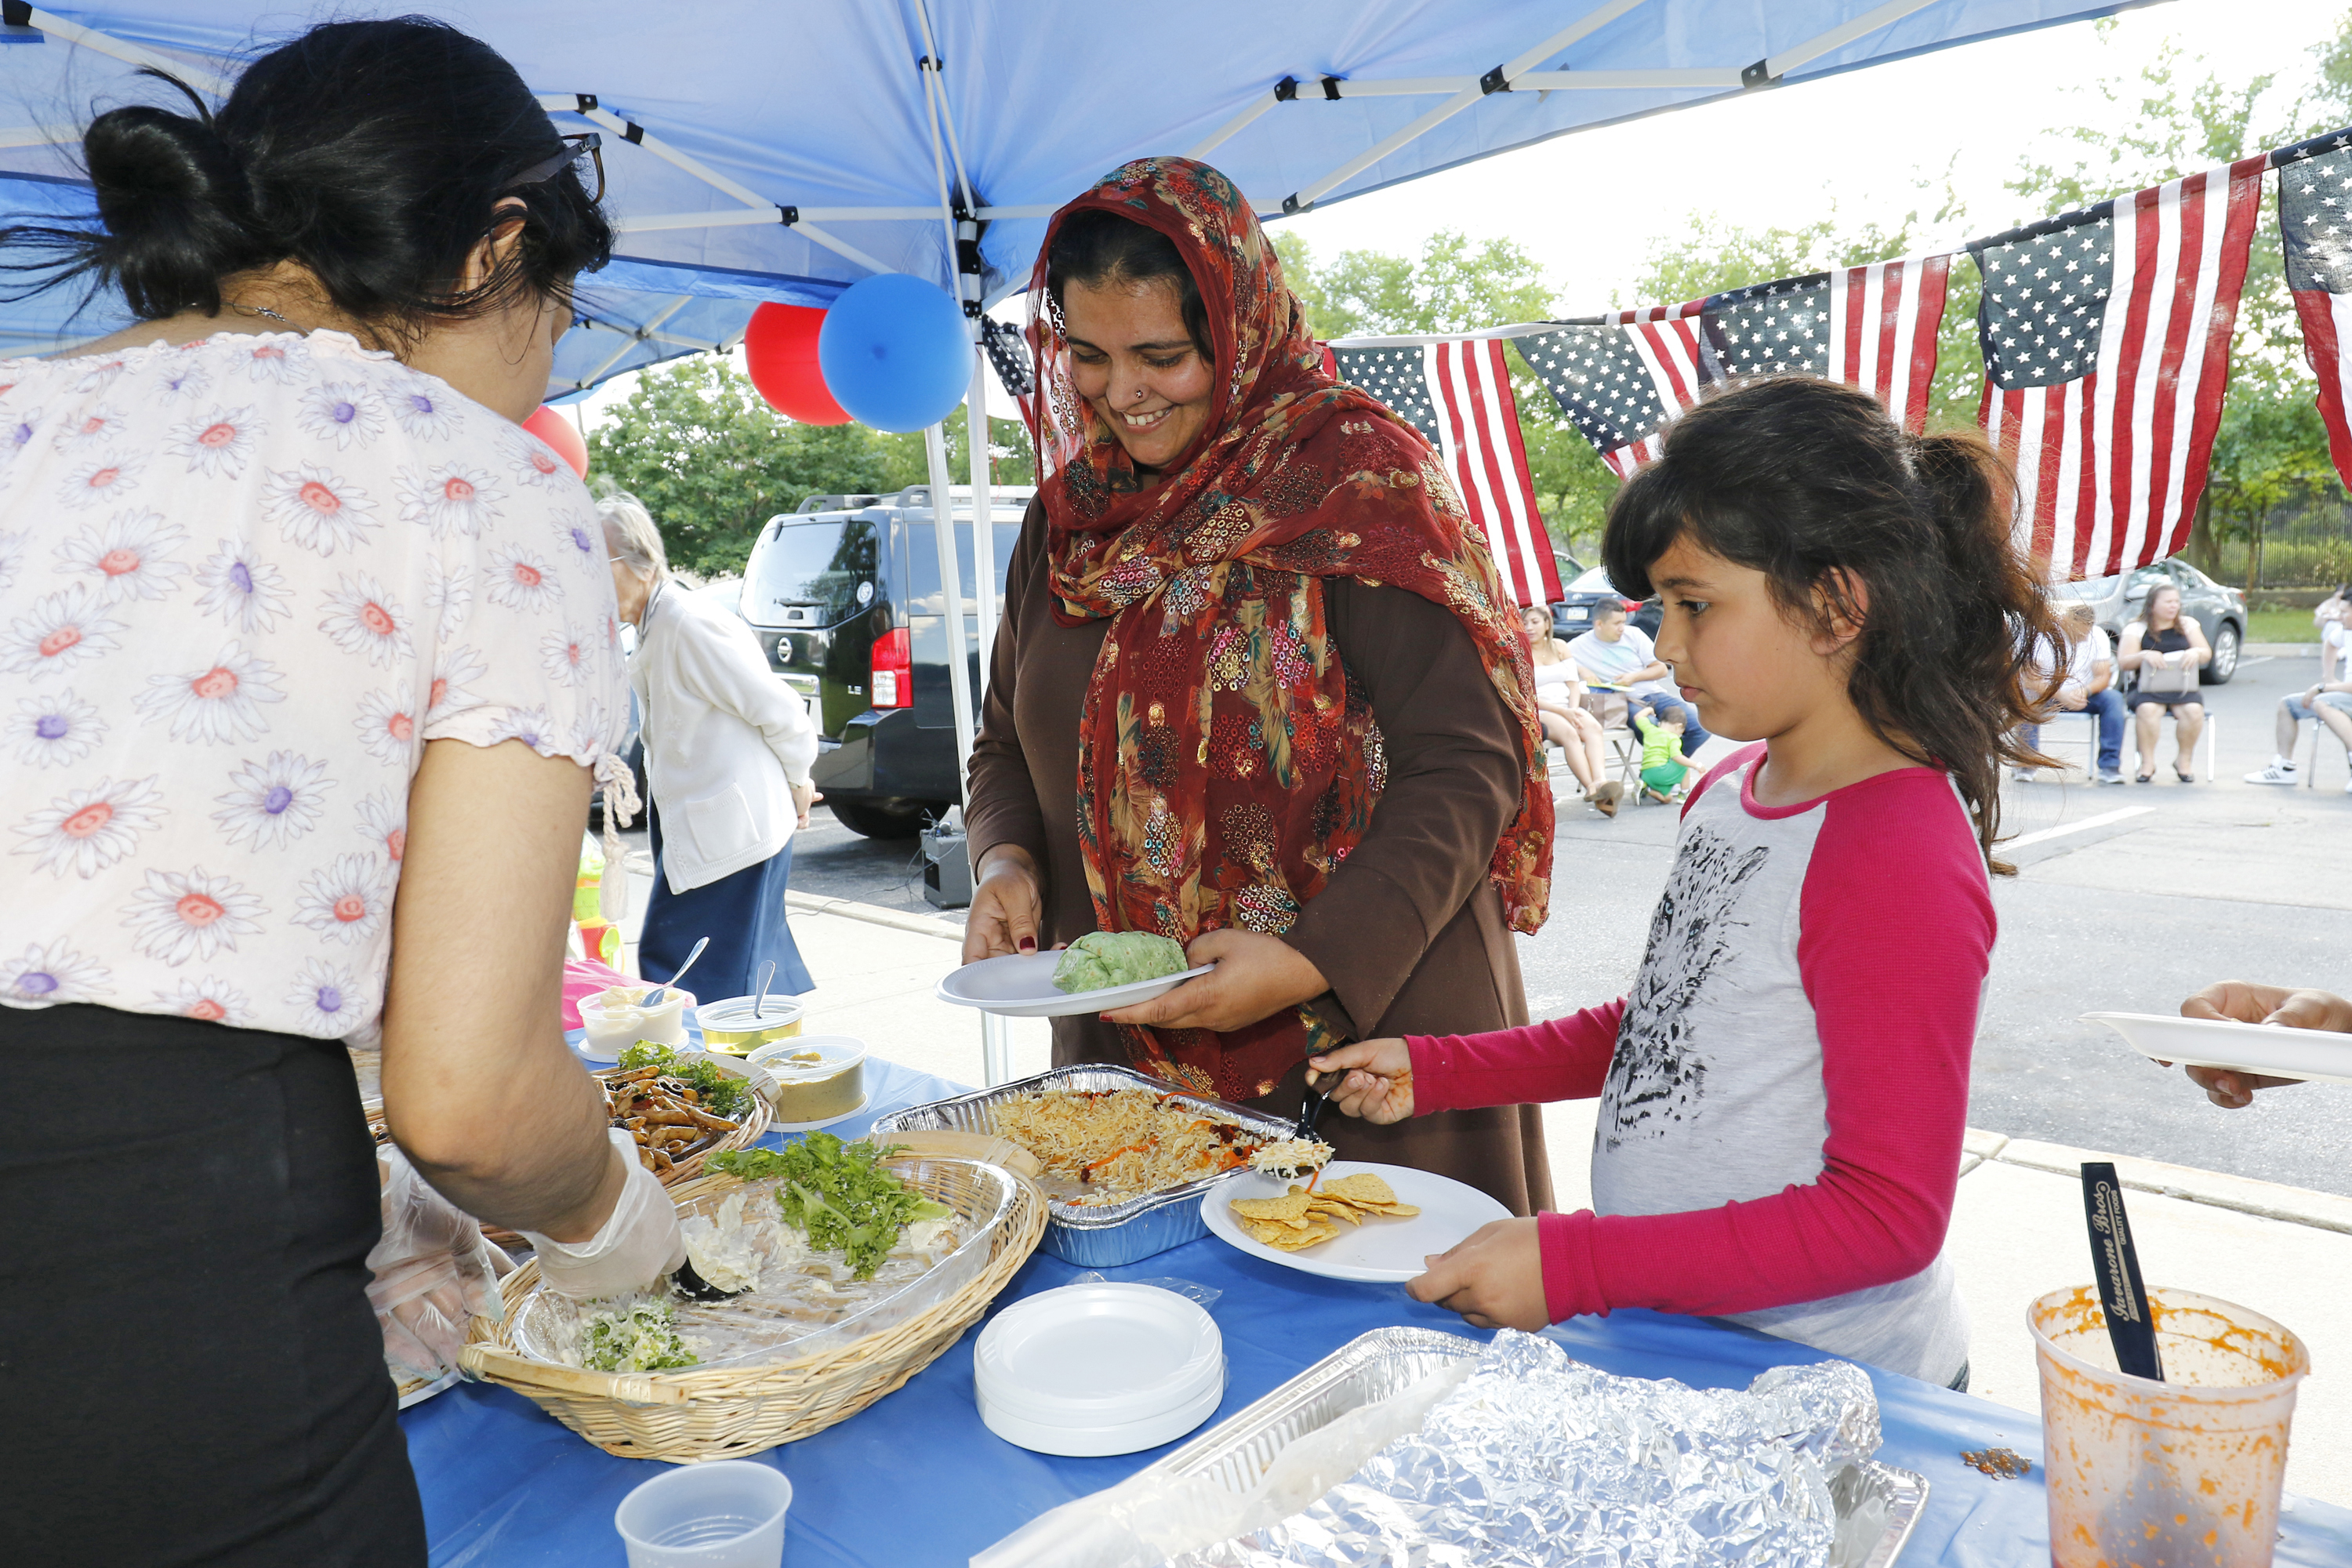 A Pakistani woman and her daughter stand in a buffet line during a Catholic Charities-hosted party for refugees held in observance of World Refugee Day June 20 in Amityville, N.Y. (CNS photo/Gregory A. Shemitz) See POPE-SHARE-JOURNEY Sept. 27, 2017.